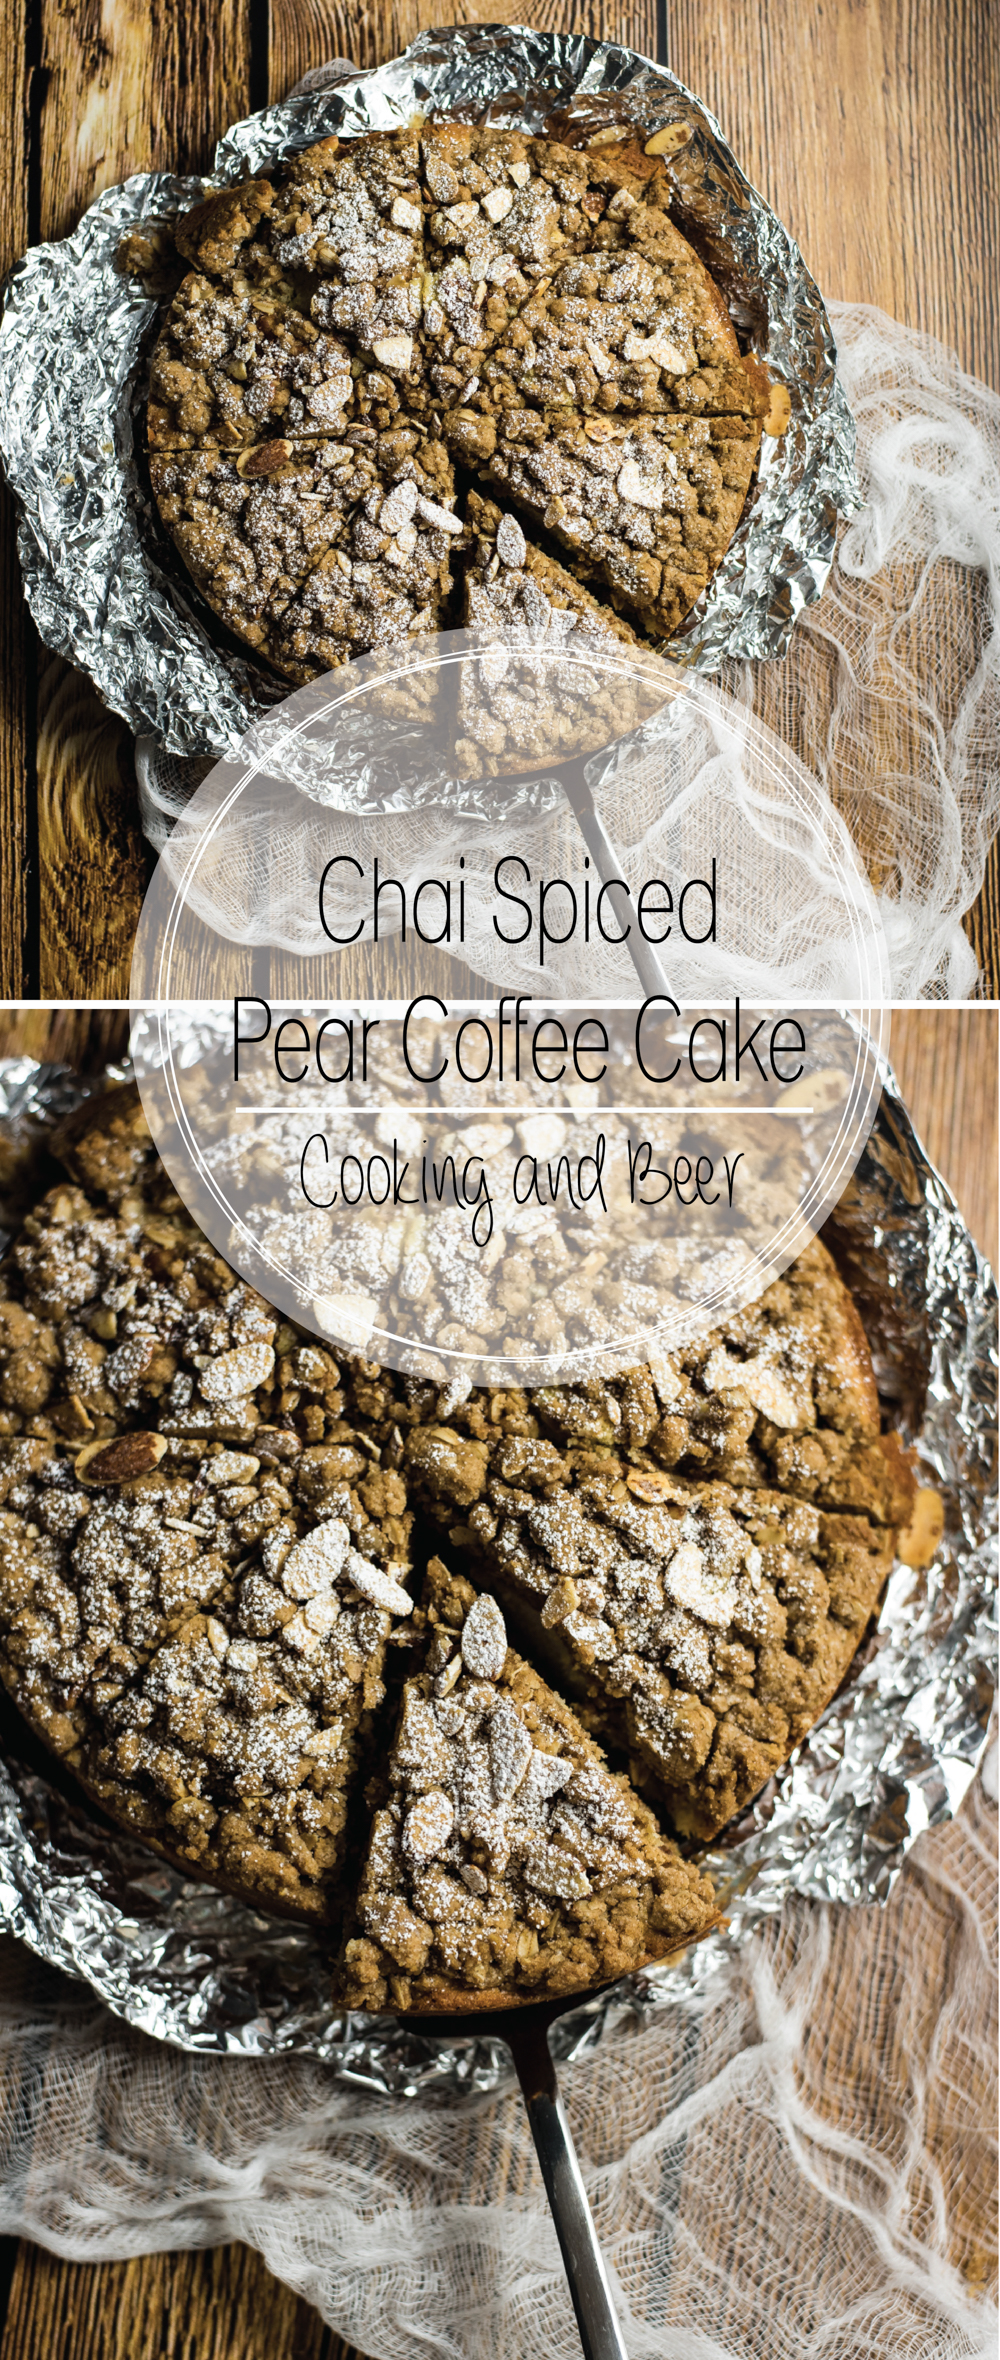 Chai Spiced Pear Coffee Cake is the perfect fall breakfast or dessert recipe. It is loaded with chai spices and topped with a crumbly cinnamon topping!